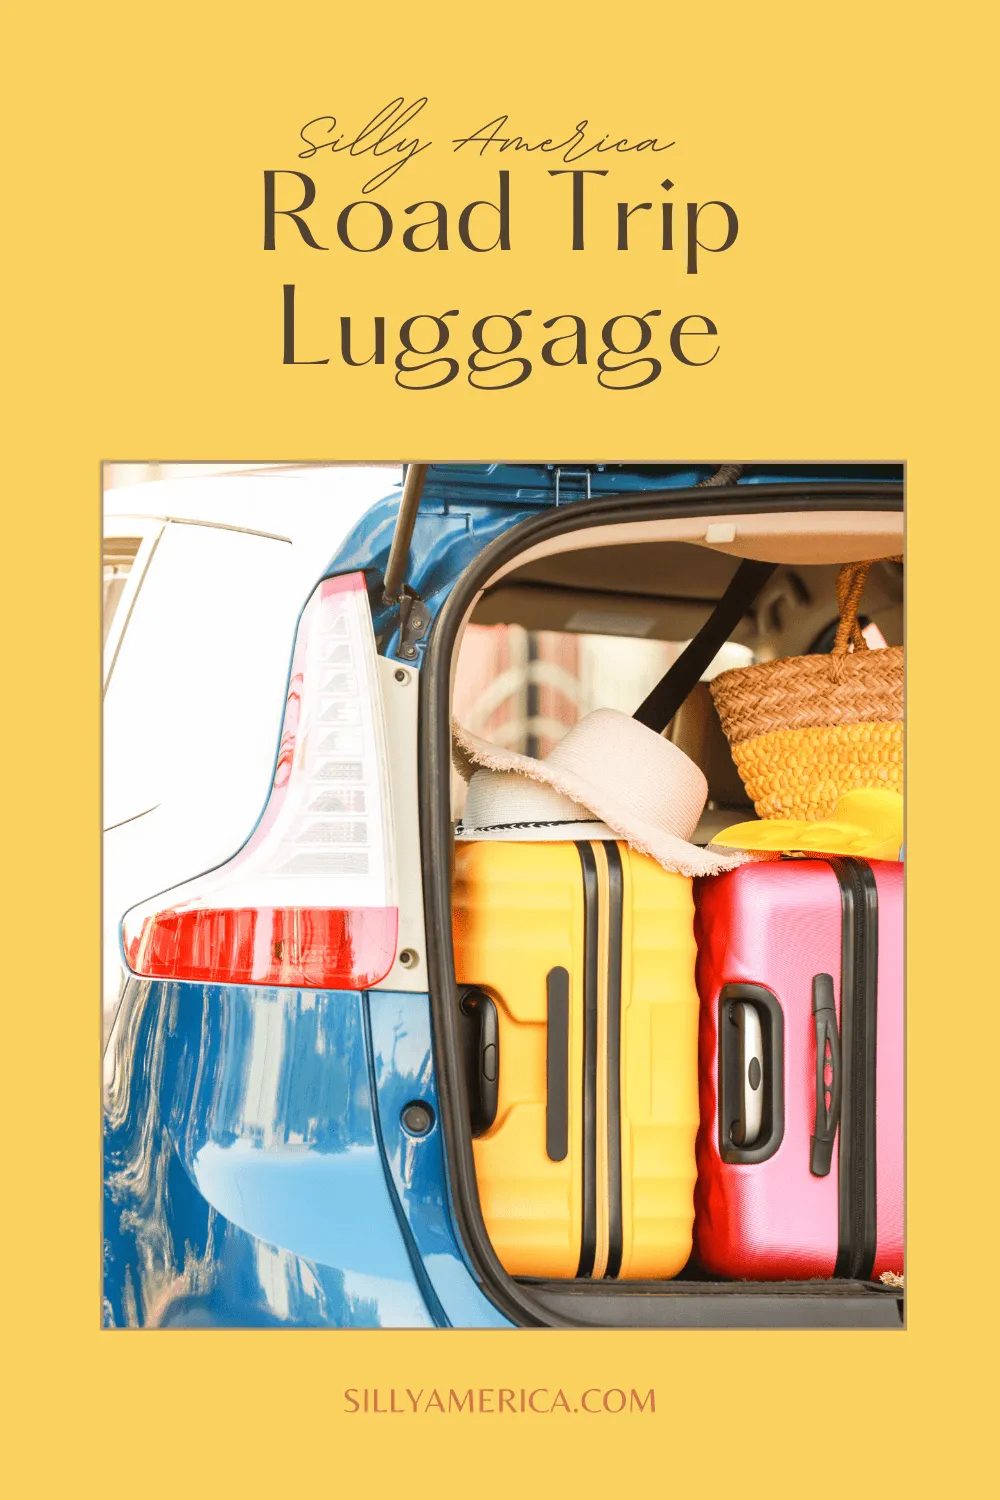 Hitting the road and not quite sure what is the best suitcase to take on a road trip? There are many options to choose from, and it's not a one-size-fits-all answer. But whatever road trip luggage you choose you'll want to think about what you need, where you're going, and how you like to travel before buying something new. #RoadTrip #RoadTripLuggage #Luggage #Travel #Suitcase #Suitcases #RoadTripPacking